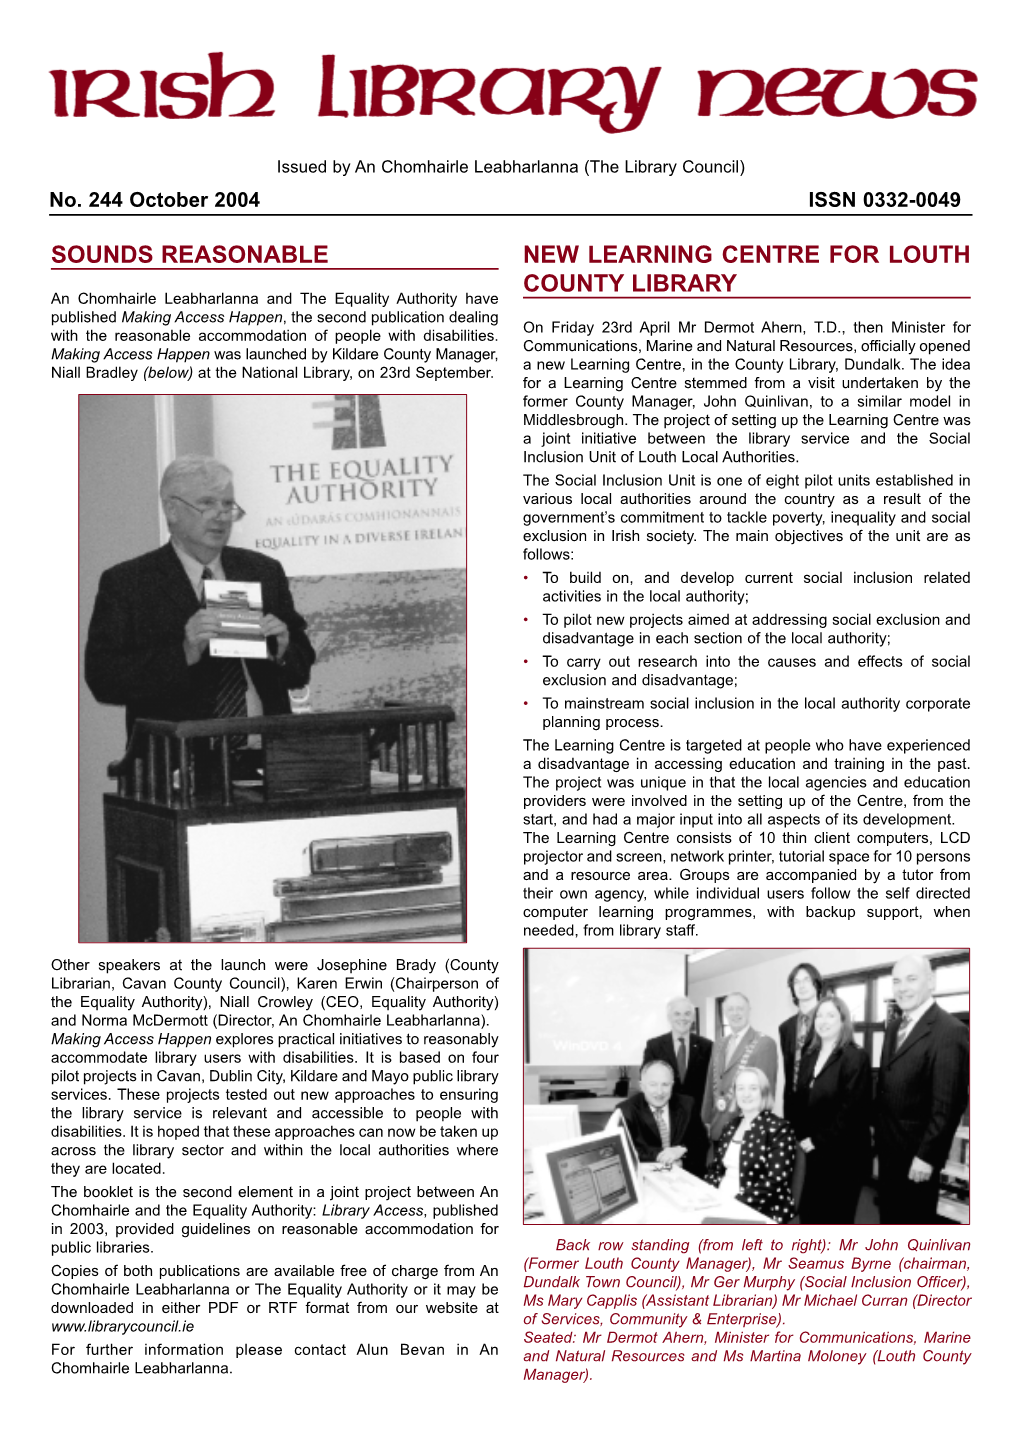 Sounds Reasonable New Learning Centre for Louth